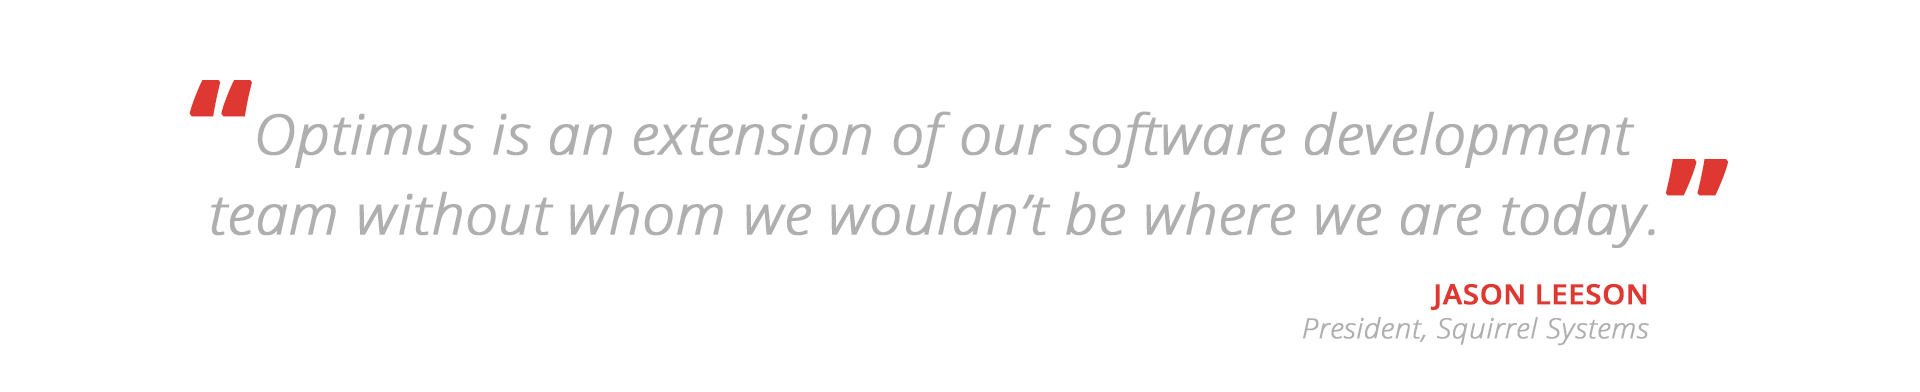 Quote-1 Cloud Managed Services